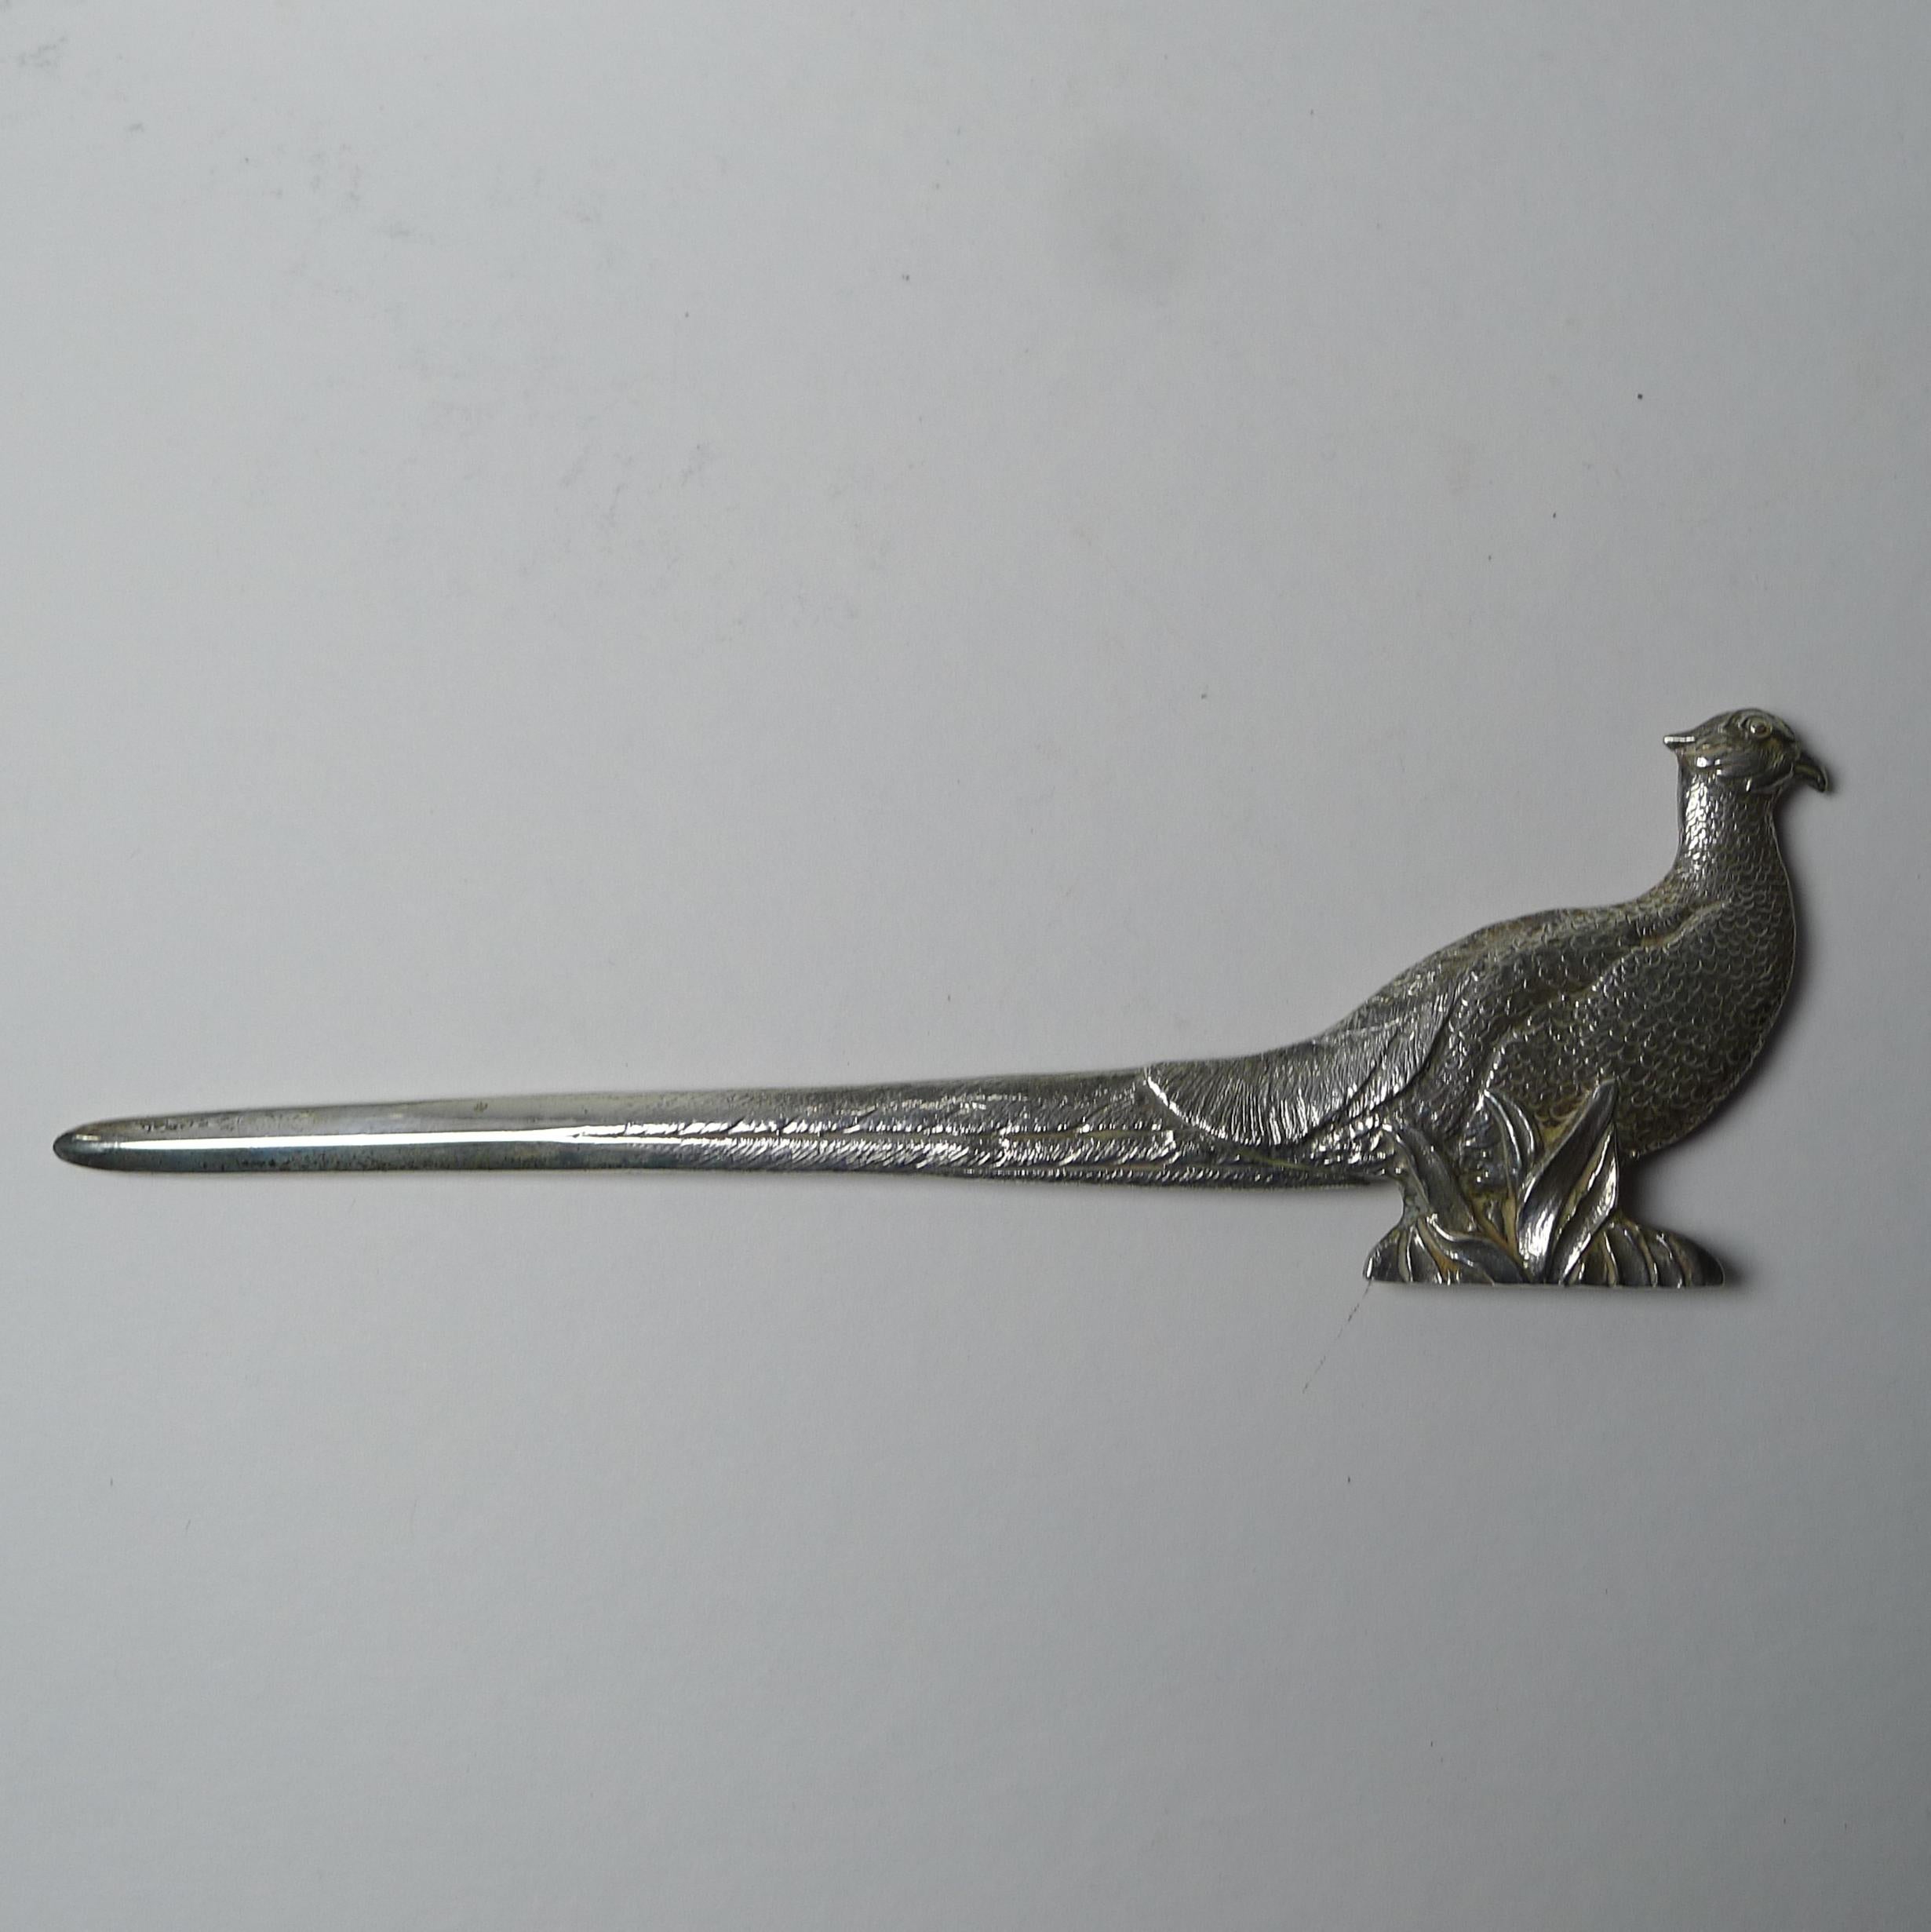 A stunning, beautifully cast letter opener in solid English Sterling silver with a hefty weight of 98.5 Grams / 3 17 Troy Ounces.

The handle features a wonderful Pheasant and the silver is fully hallmarked for London 1962, so 60 years old; the